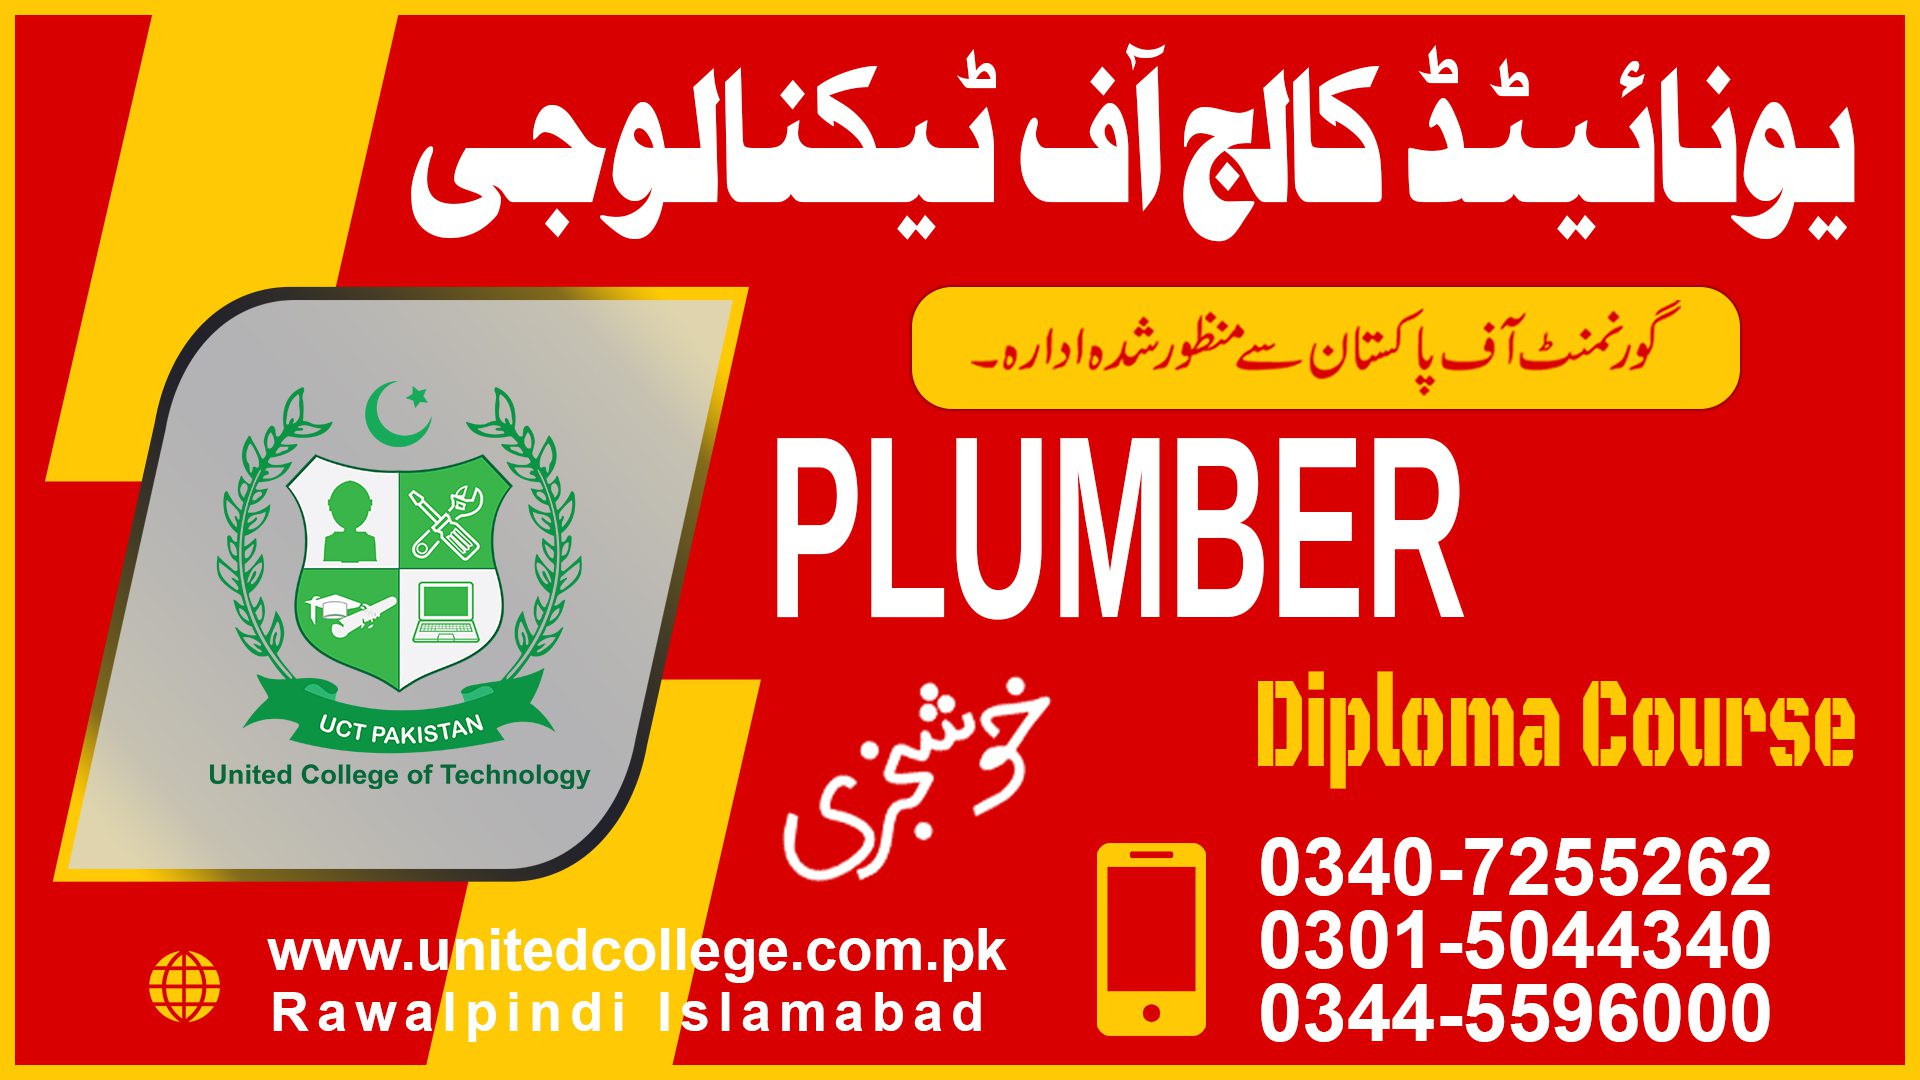 PLUMBER COURSE